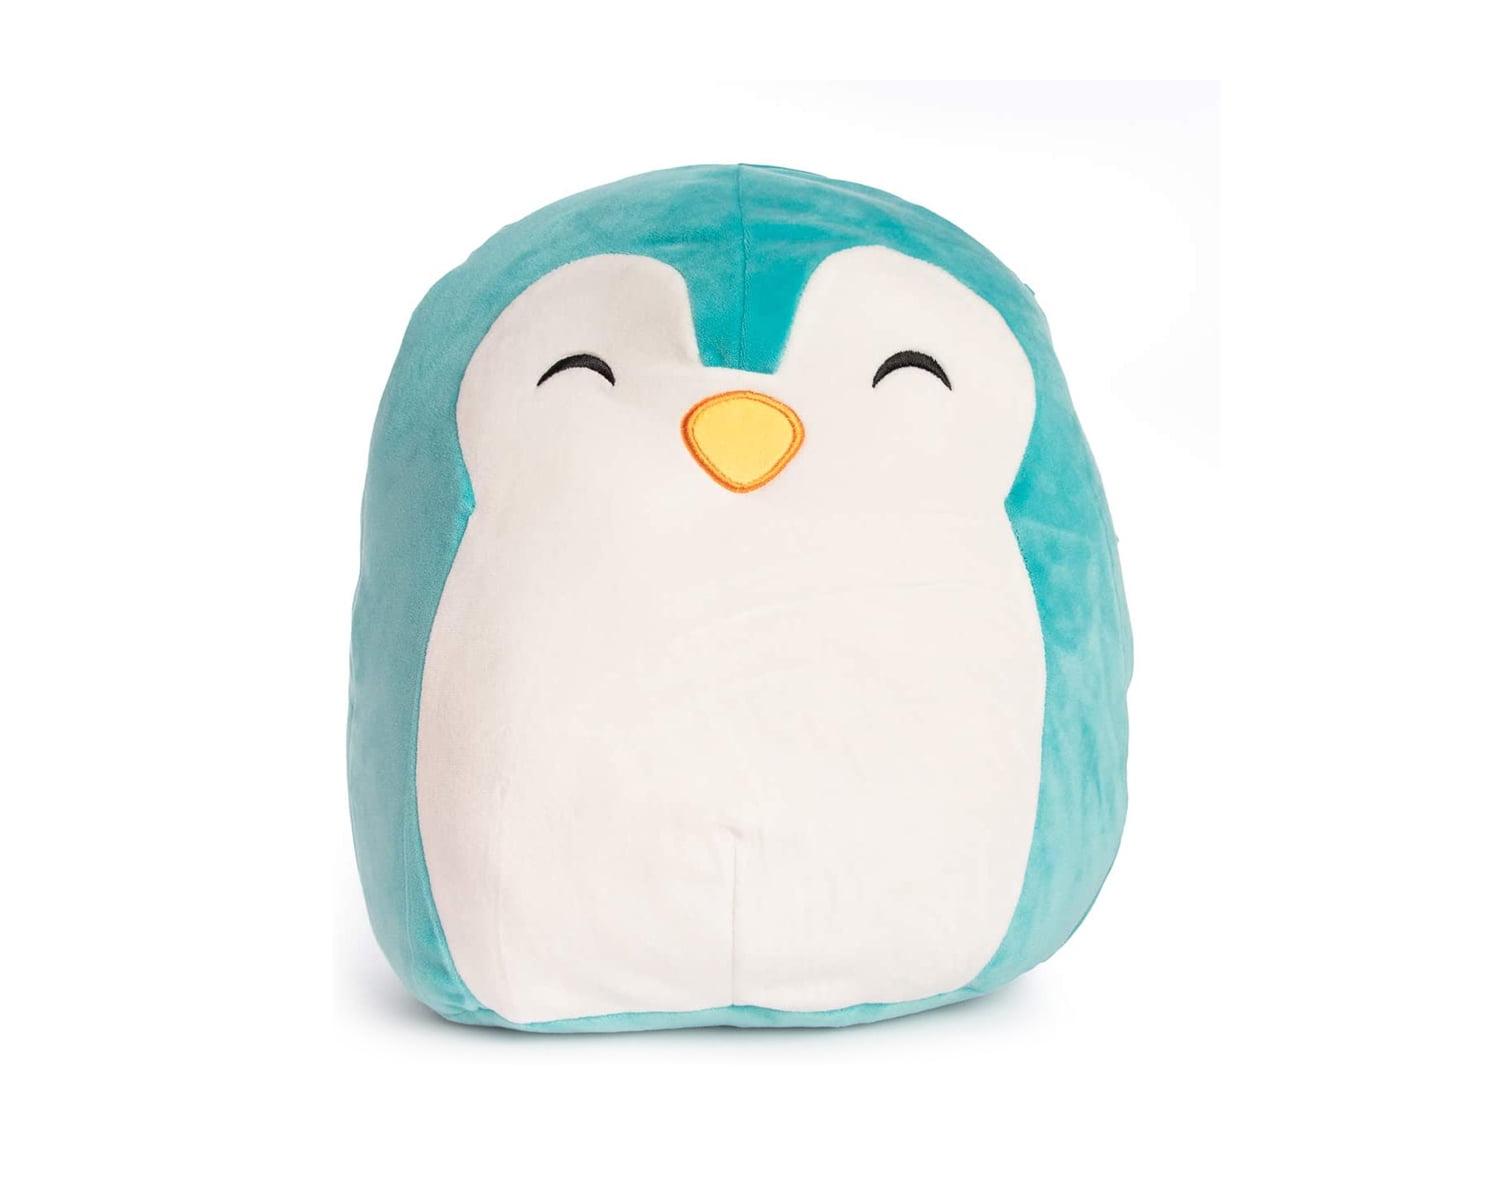 Hug Or Use As A Pillow Cuddle 16 inch Tanner The Teal Penguin Squishmallow Plush